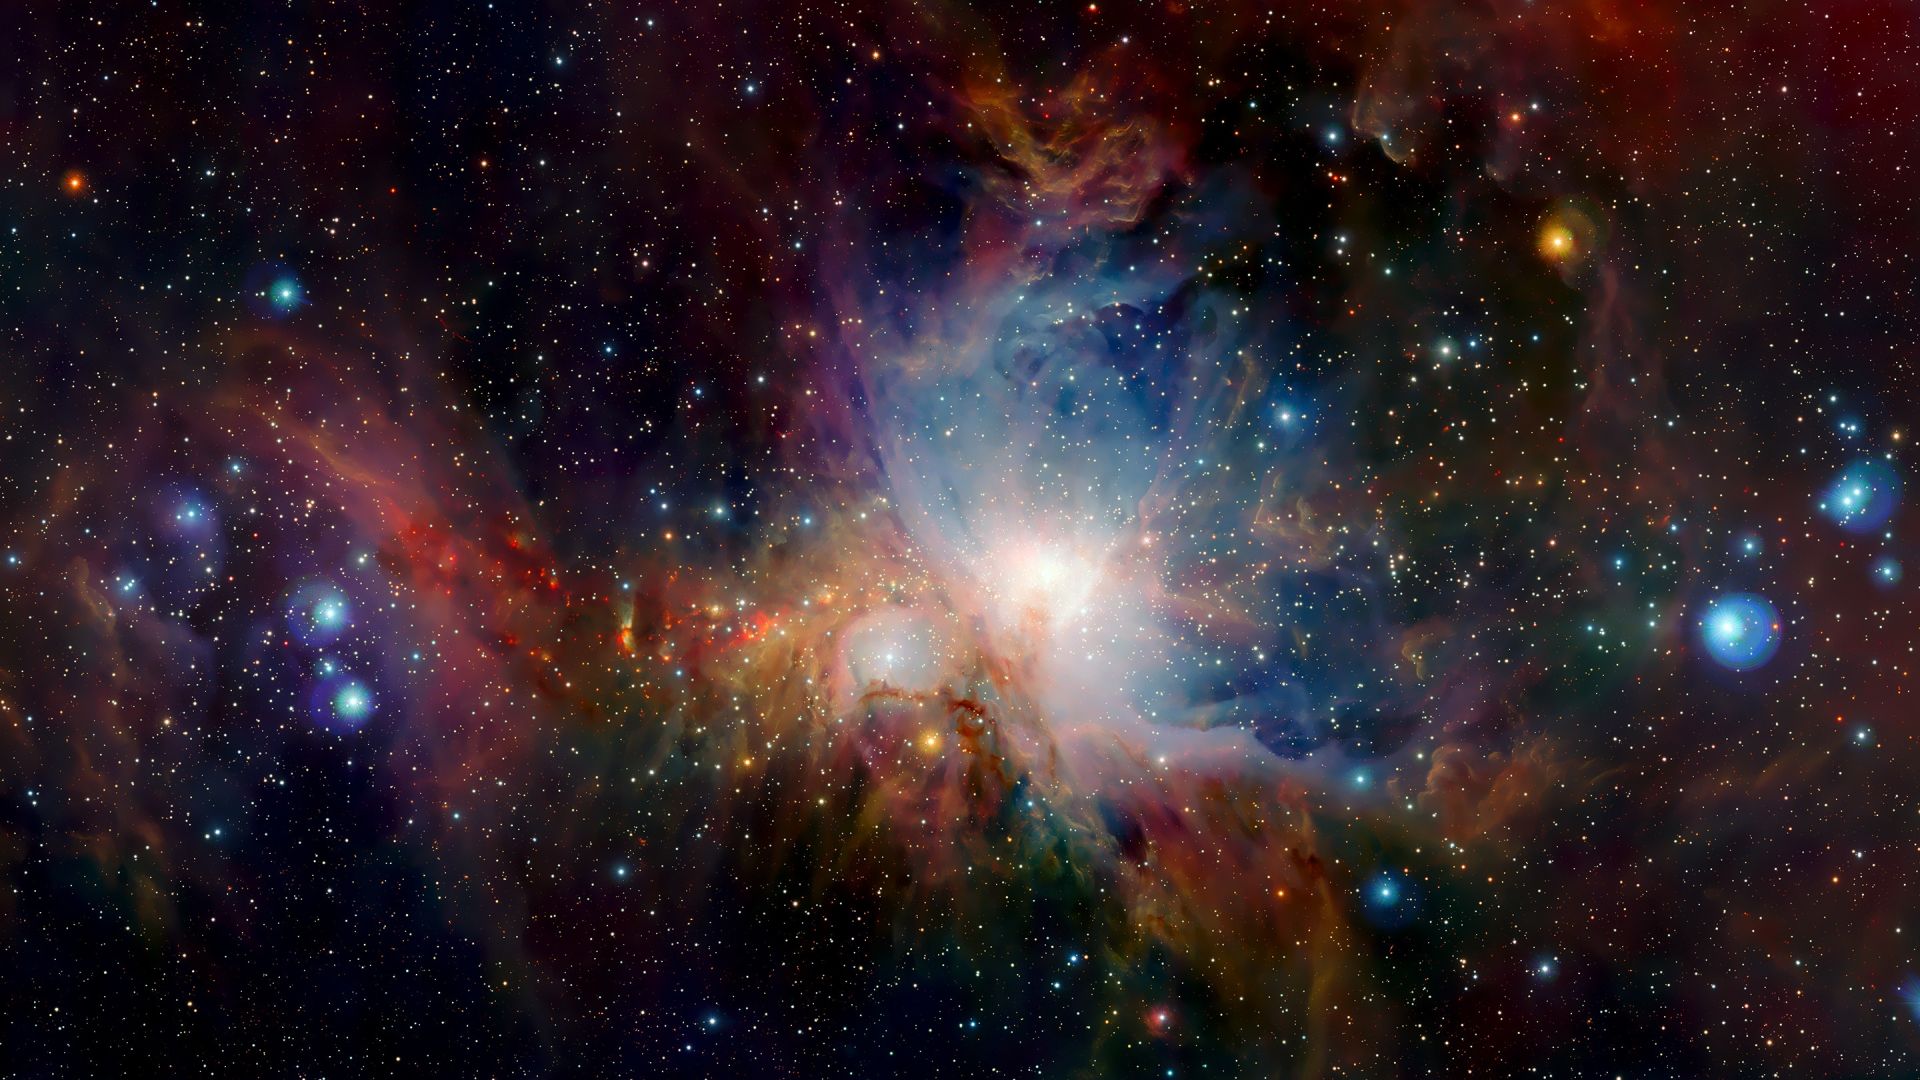 Desktop Wallpaper Orion Nebula Astrophotography, Hd Image, Picture,  Background, 1t Eh